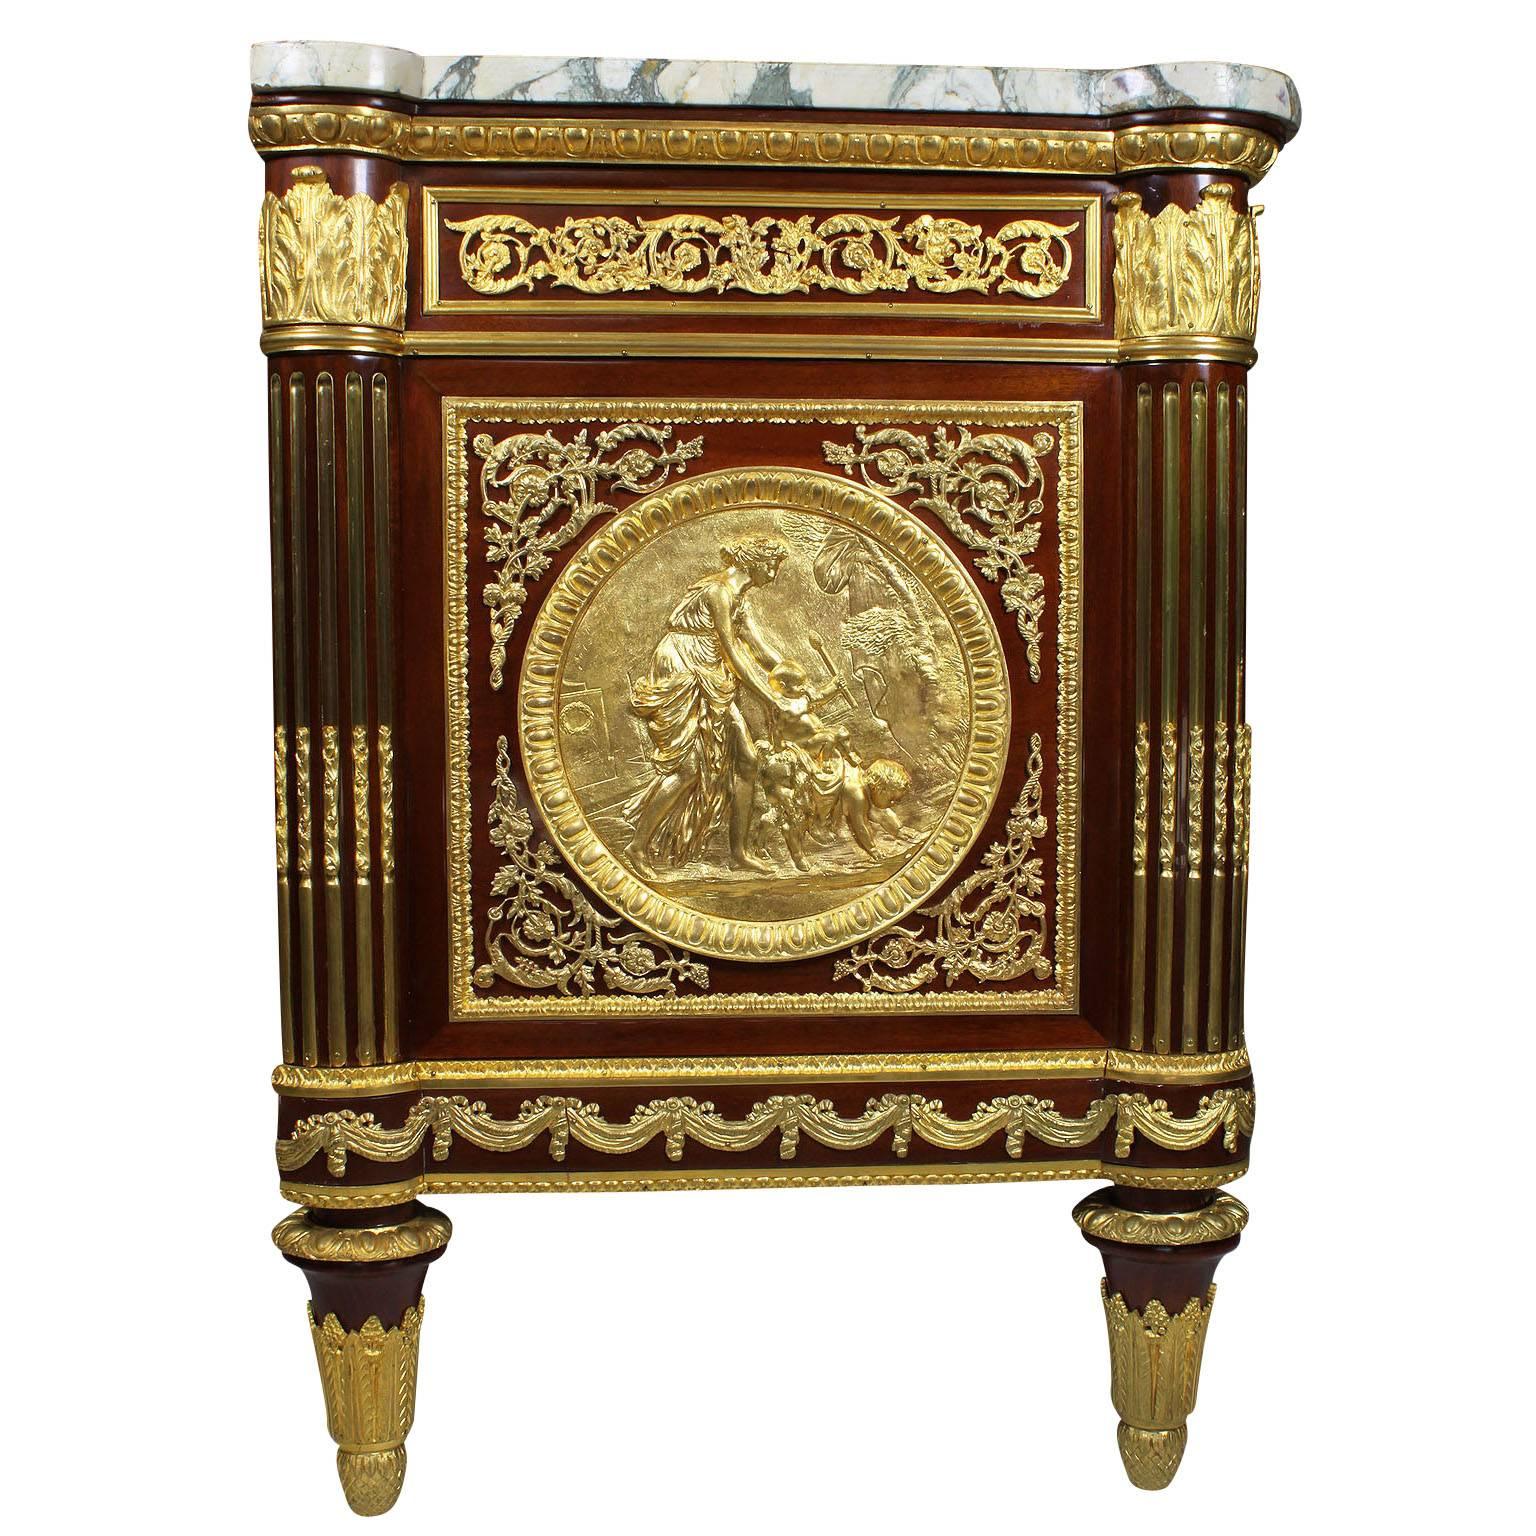 French 19th-20th Century Louis XVI Style Mahogany Ormolu-Mounted Commode In Good Condition For Sale In Los Angeles, CA